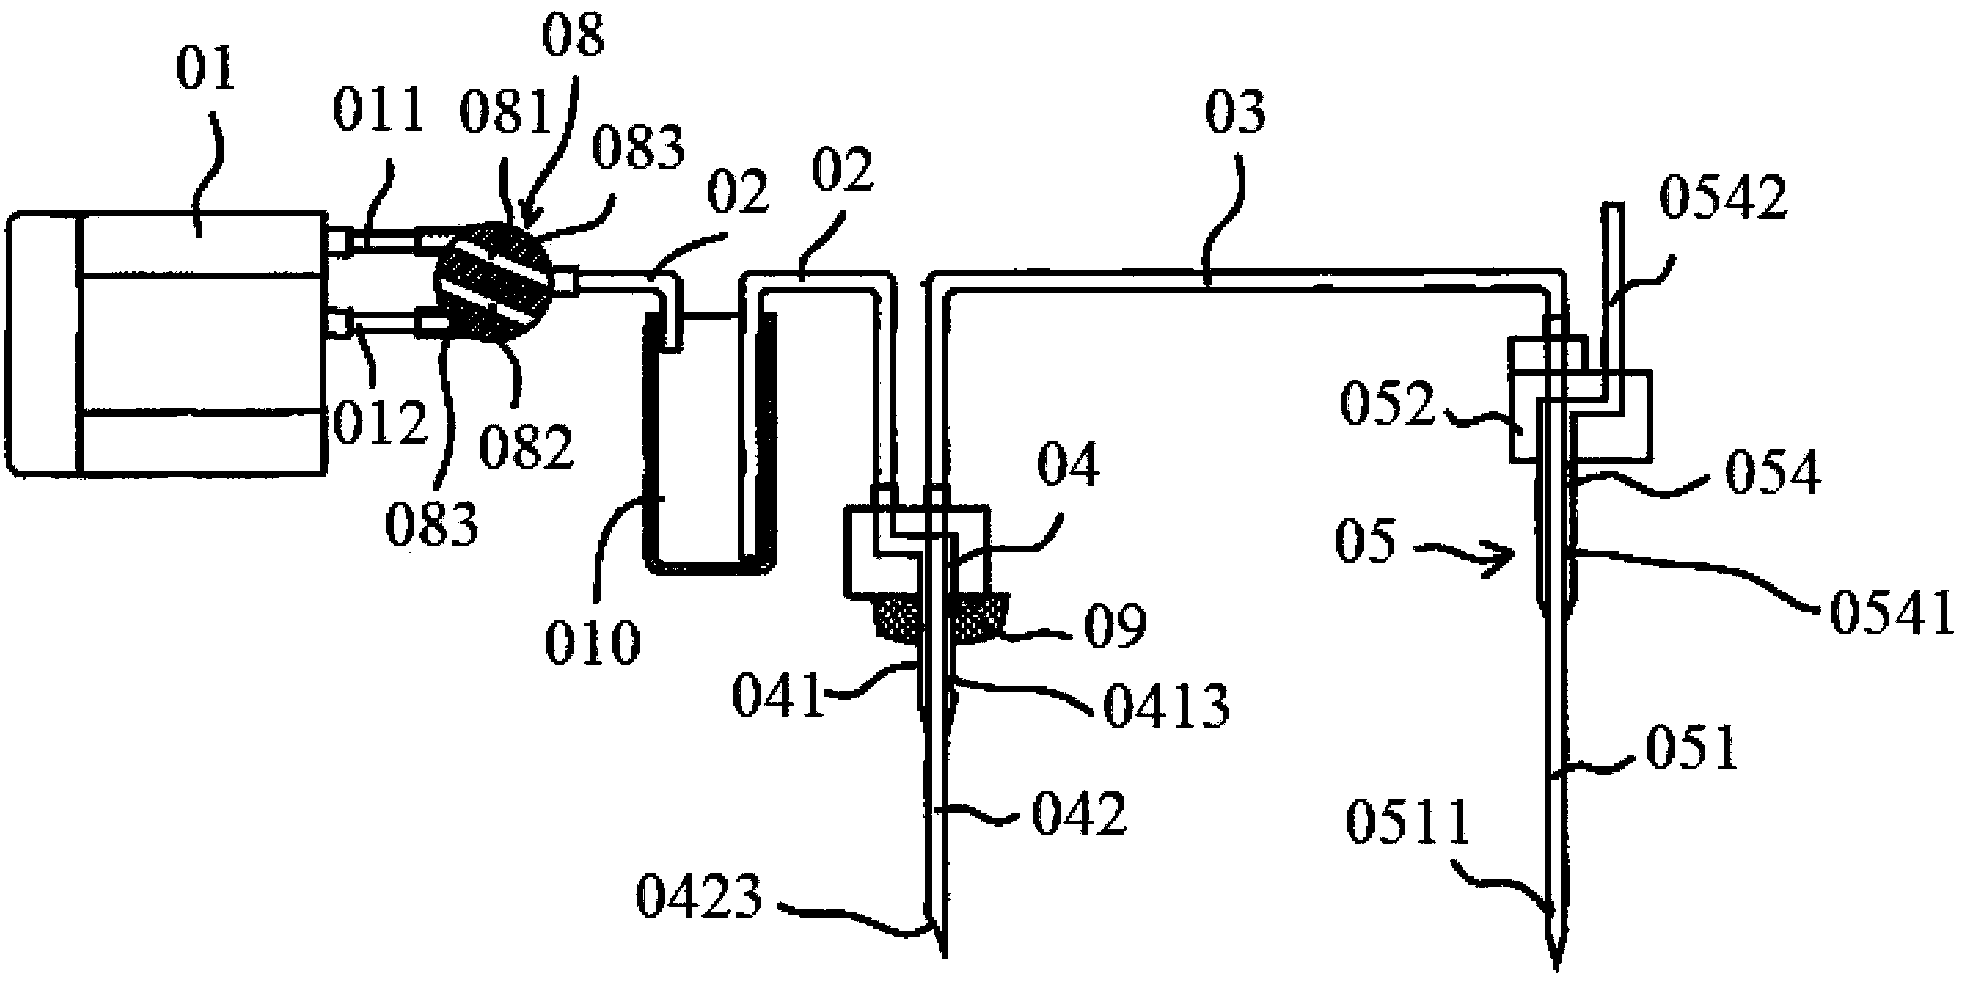 Dispensing method used for injection powder bottle and dispensing device